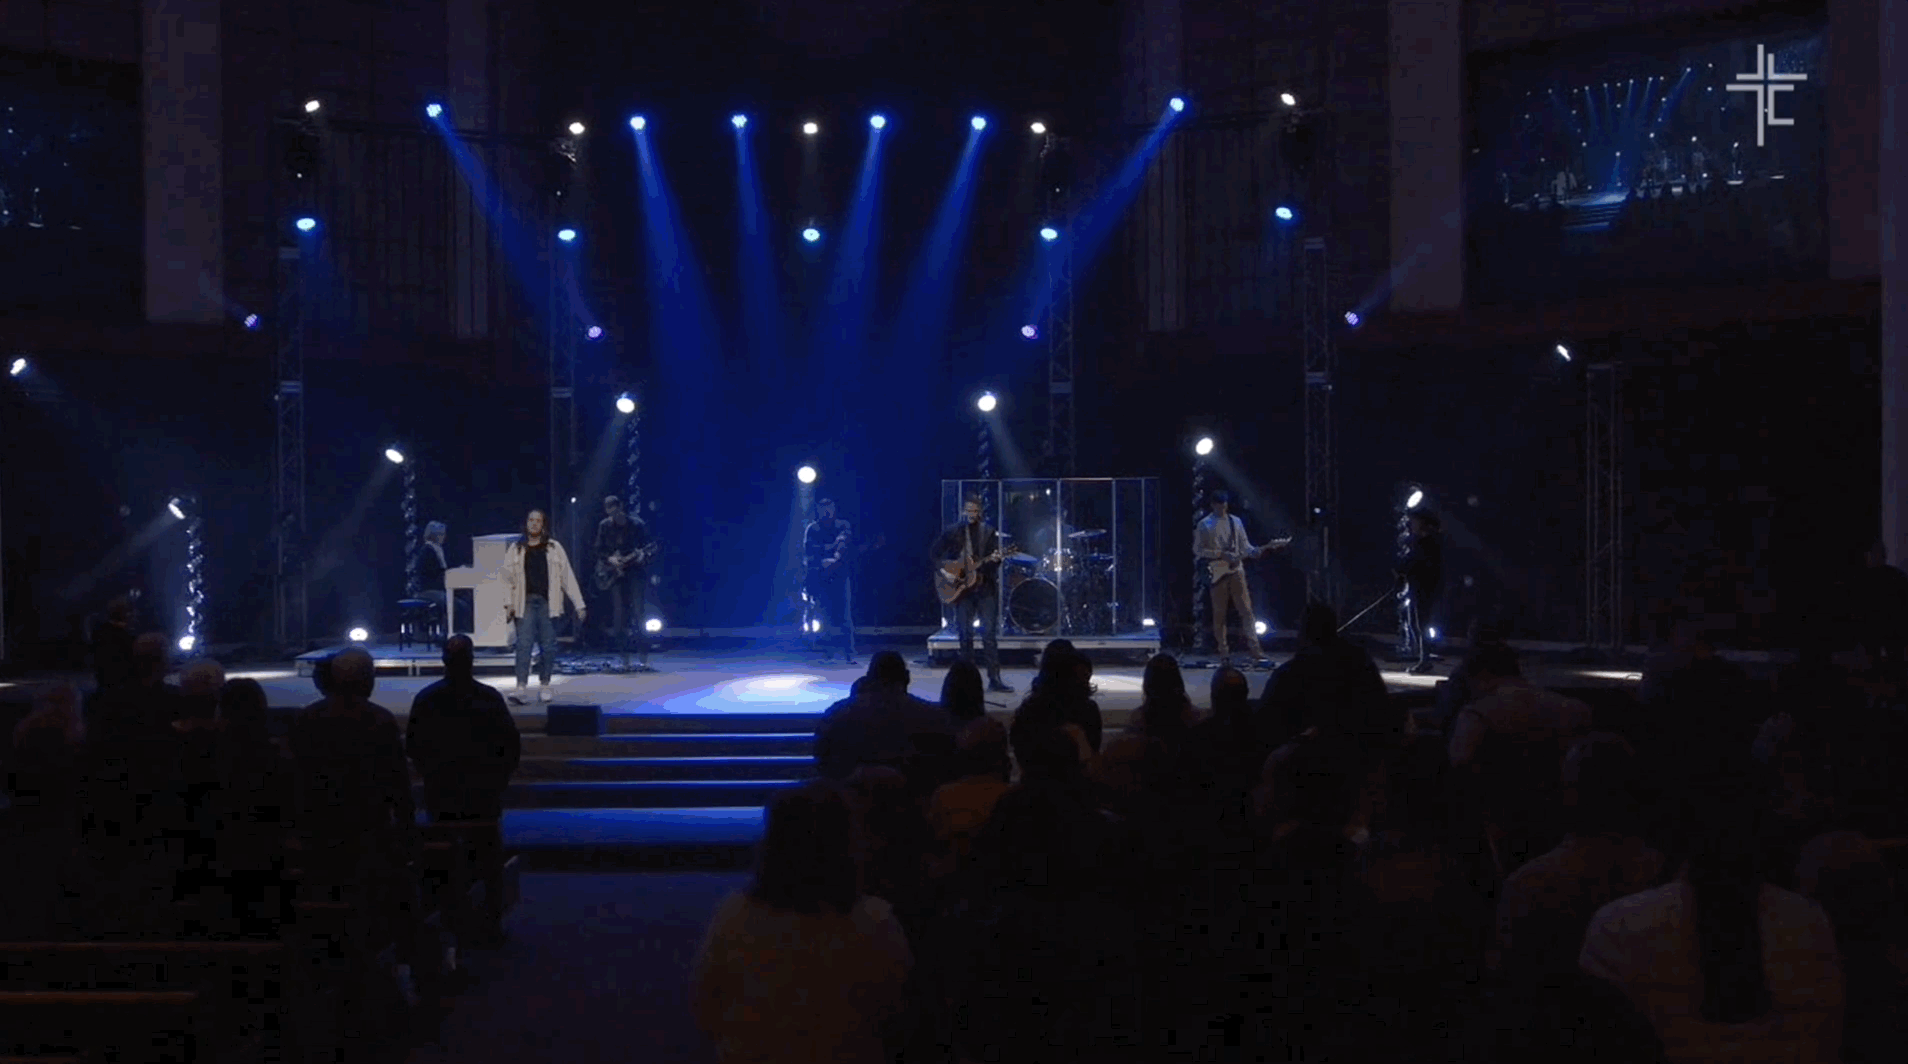 Slow tracking wide shot of worship band playing on church stage